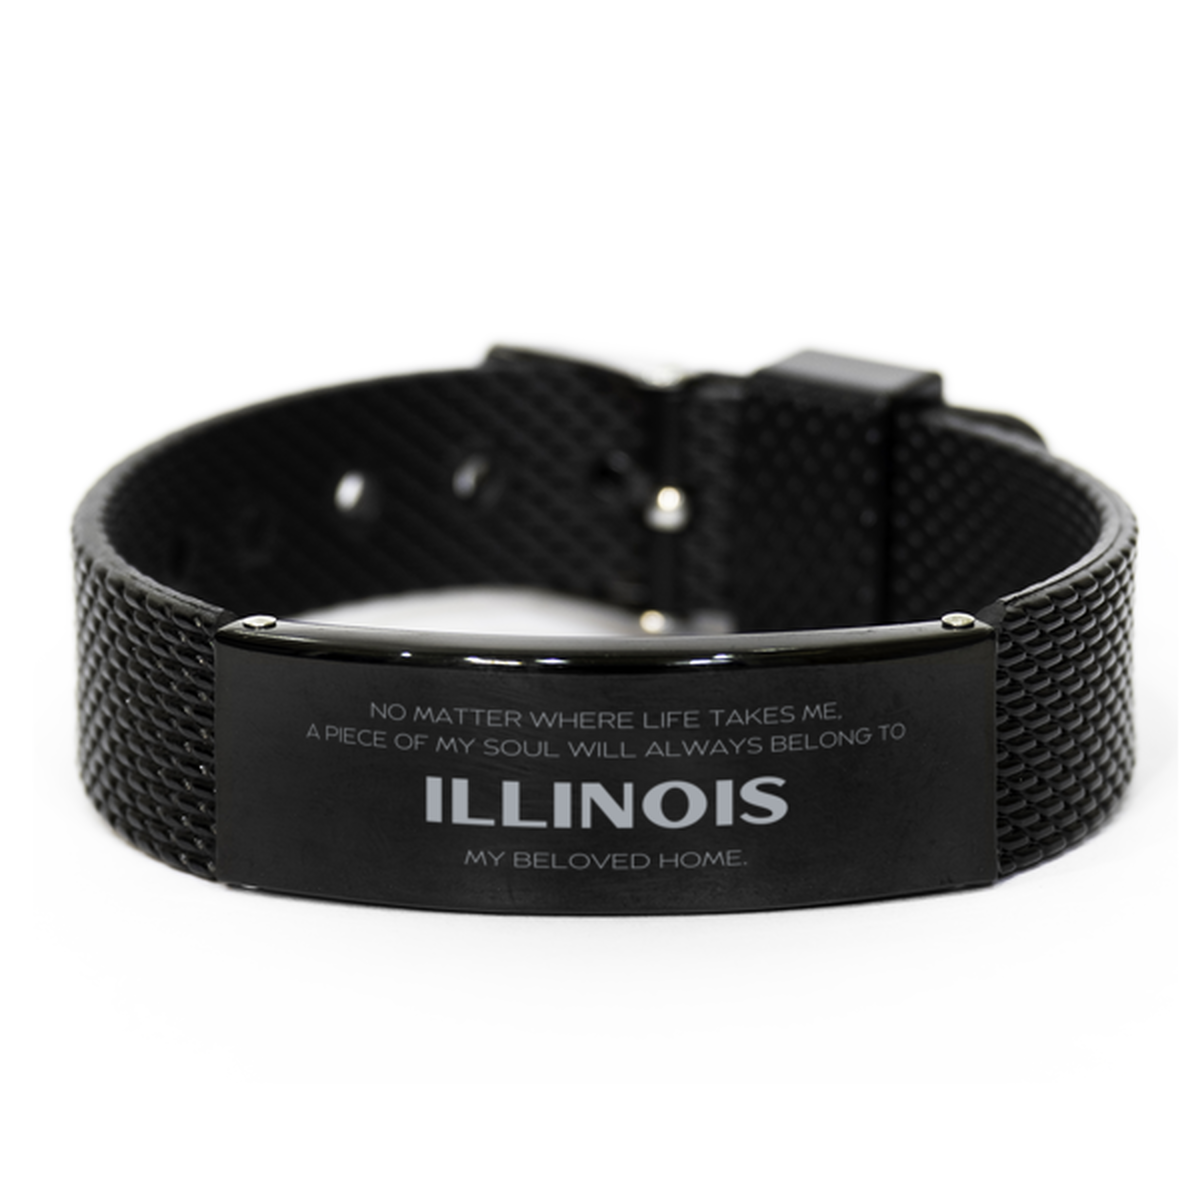 Love Illinois State Gifts, My soul will always belong to Illinois, Proud Black Shark Mesh Bracelet, Birthday Unique Gifts For Illinois Men, Women, Friends